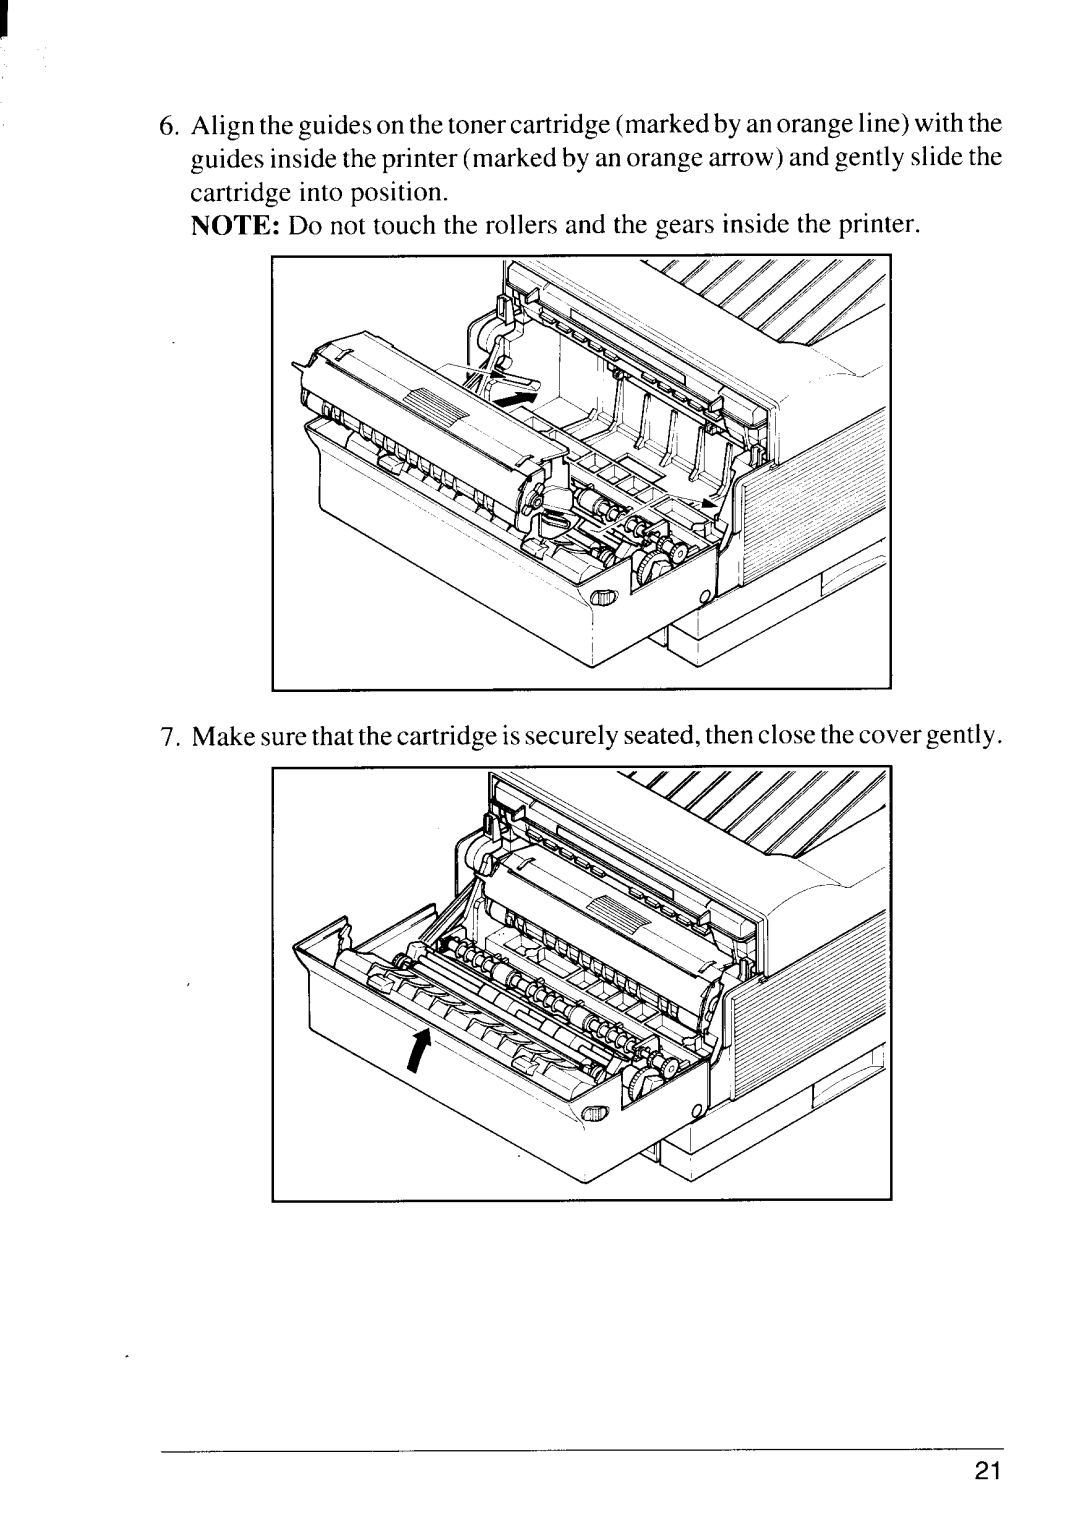 Star Micronics LS-5 TT, LS-5 EX operation manual NOTE Do not touch the rollers and the gears inside the printer 